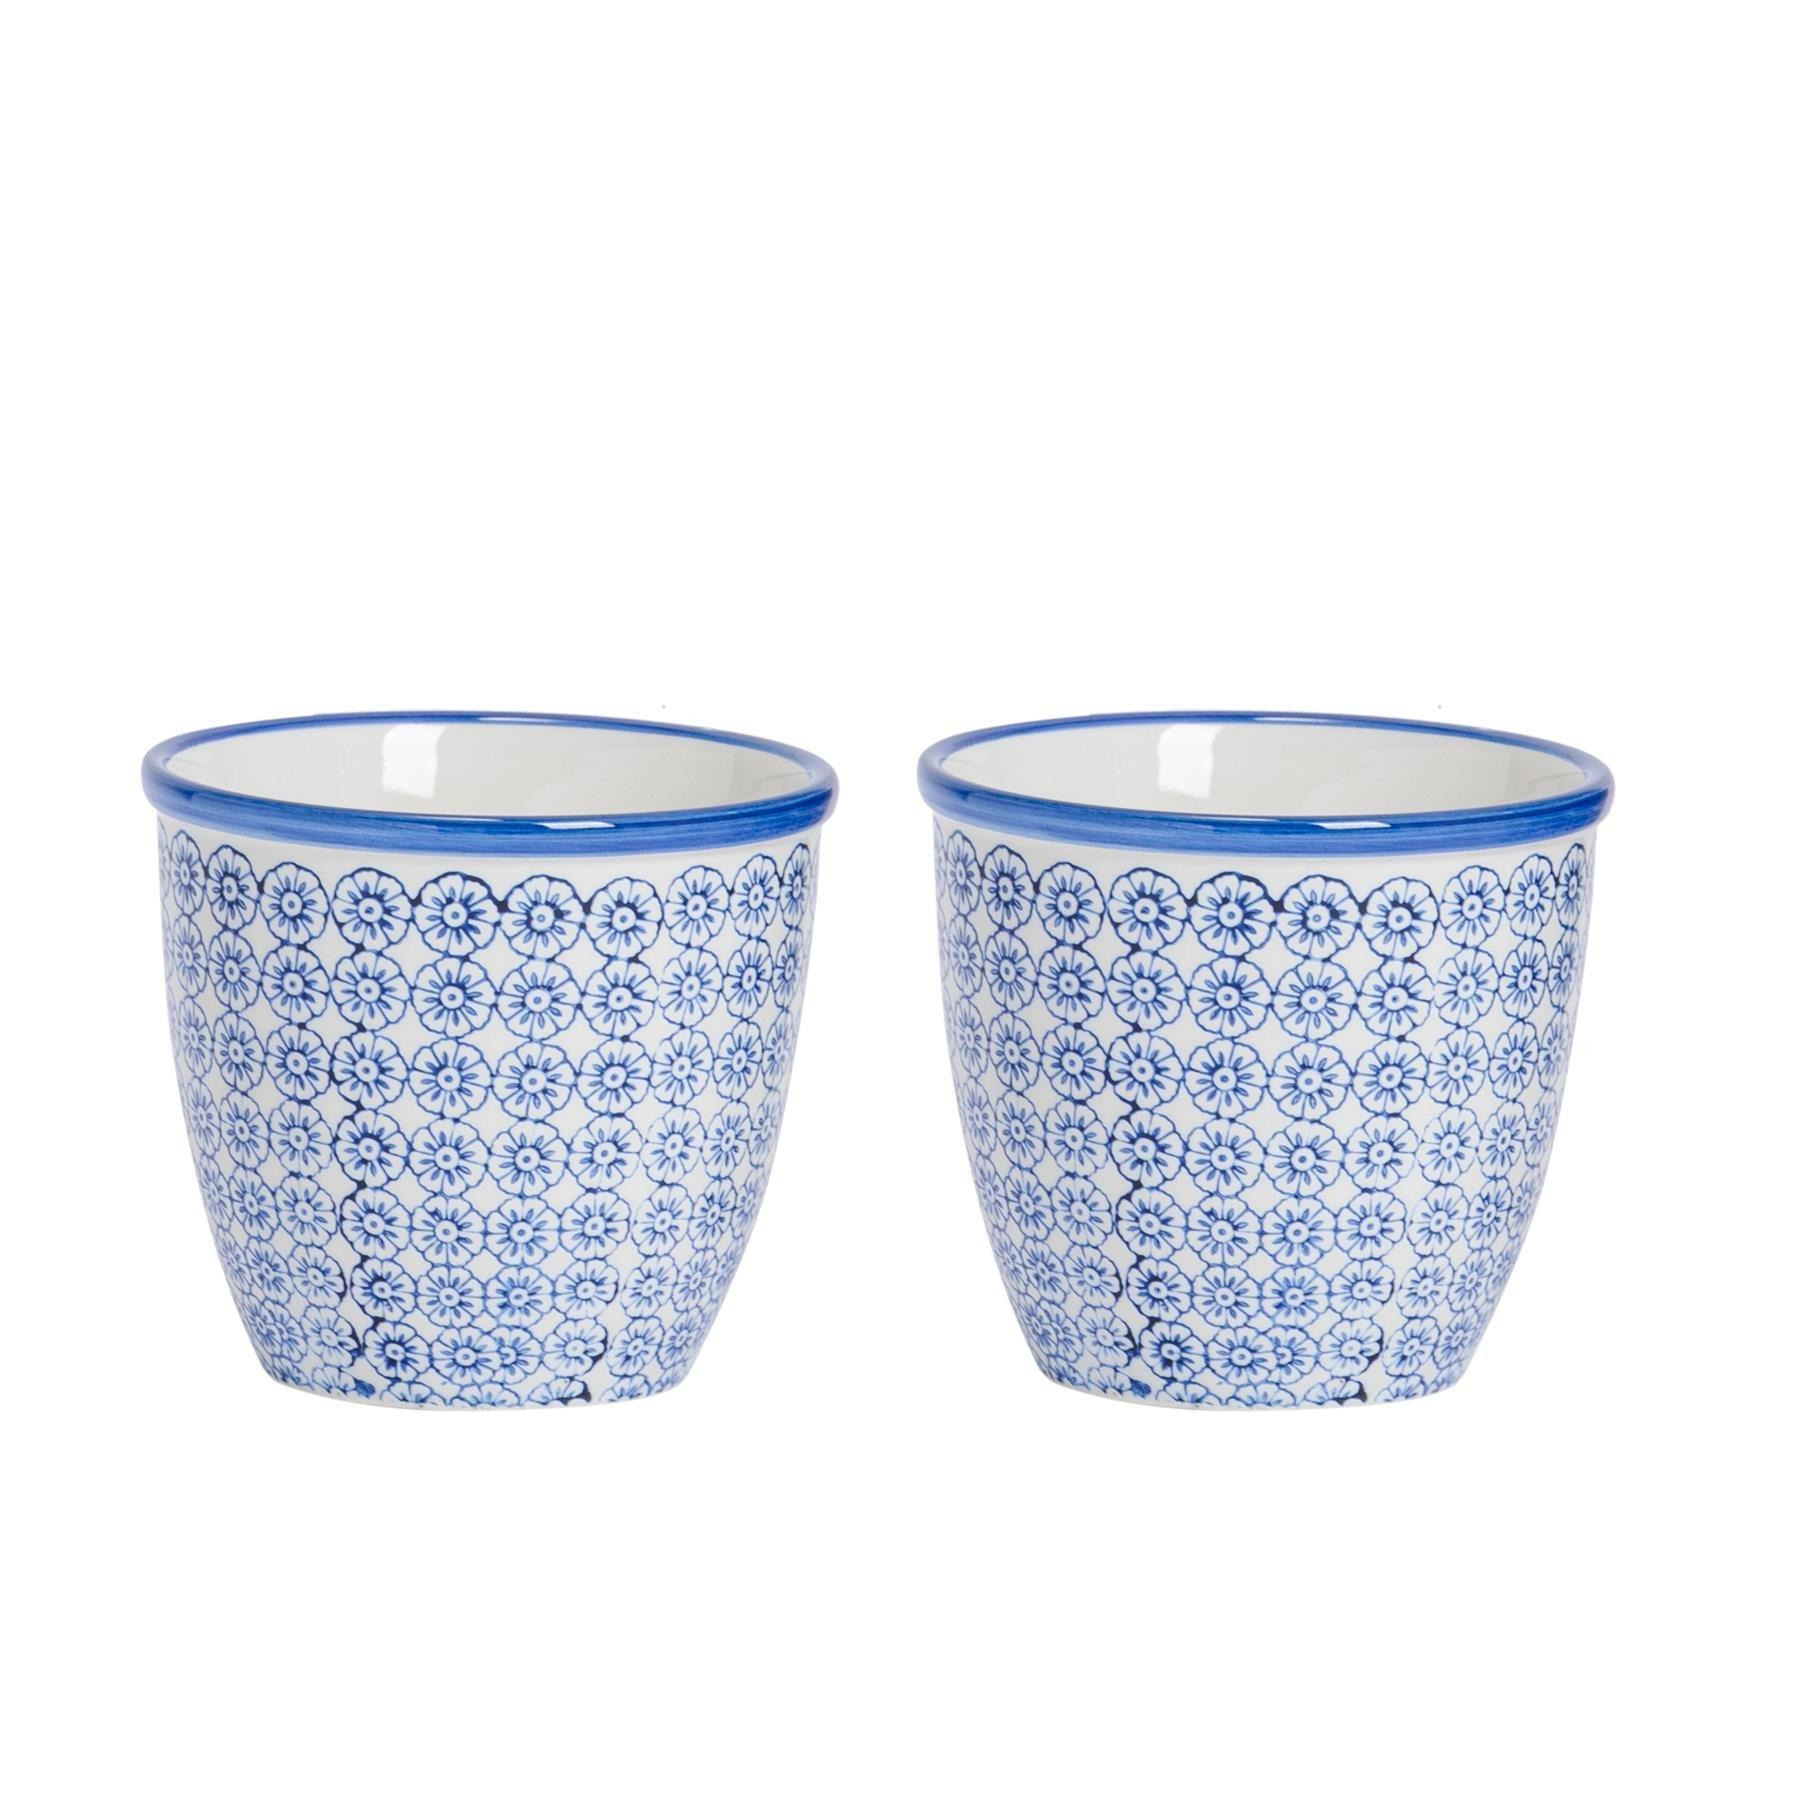 Hand-Printed Plant Pots 14cm Pack of 2 - image 1